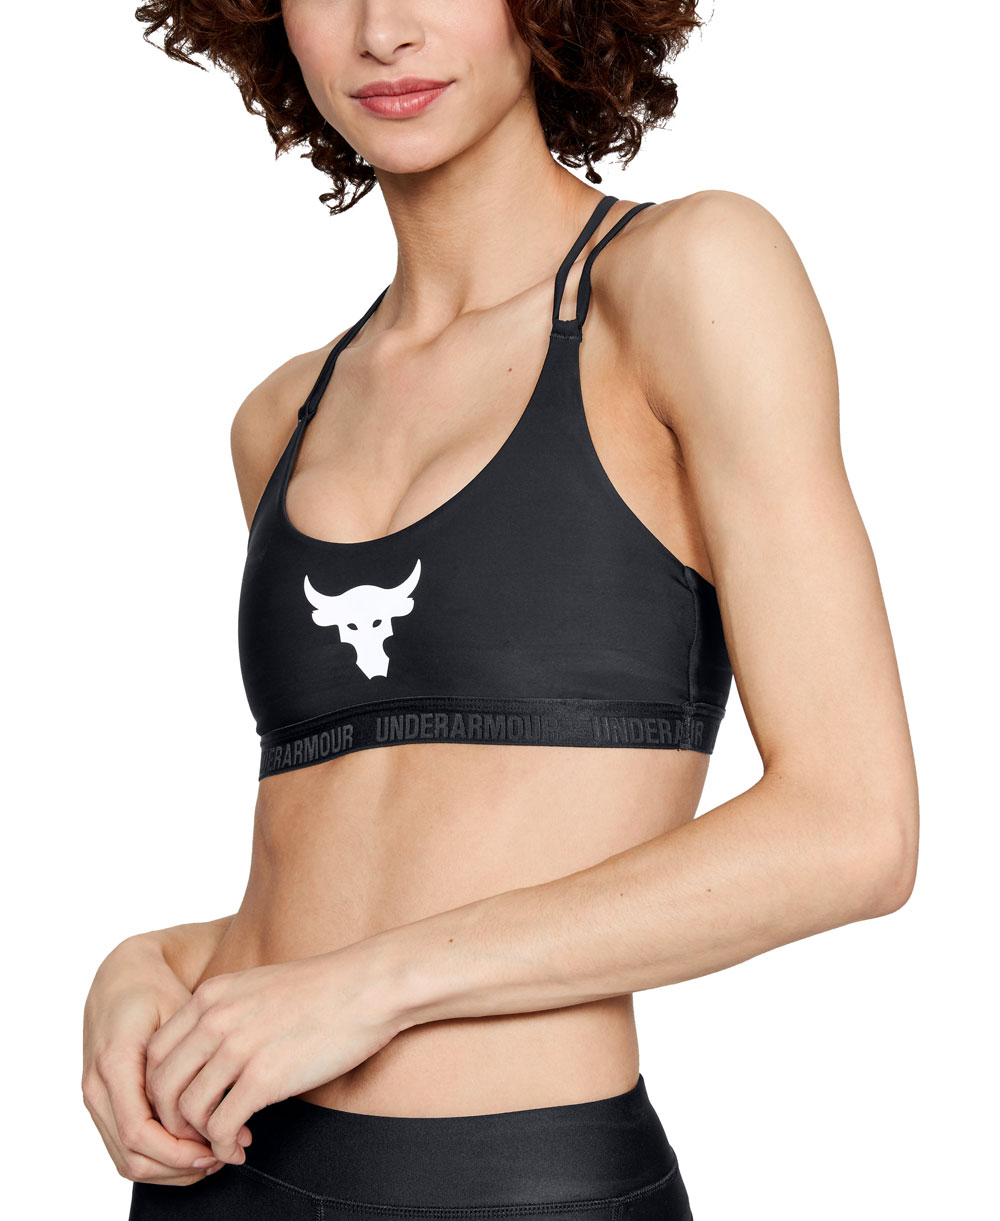 https://www.anygivensunday.shop/1537-large_default/under-armour-womens-sports-bra-project-rock-bull-triangle-back-bralette.jpg